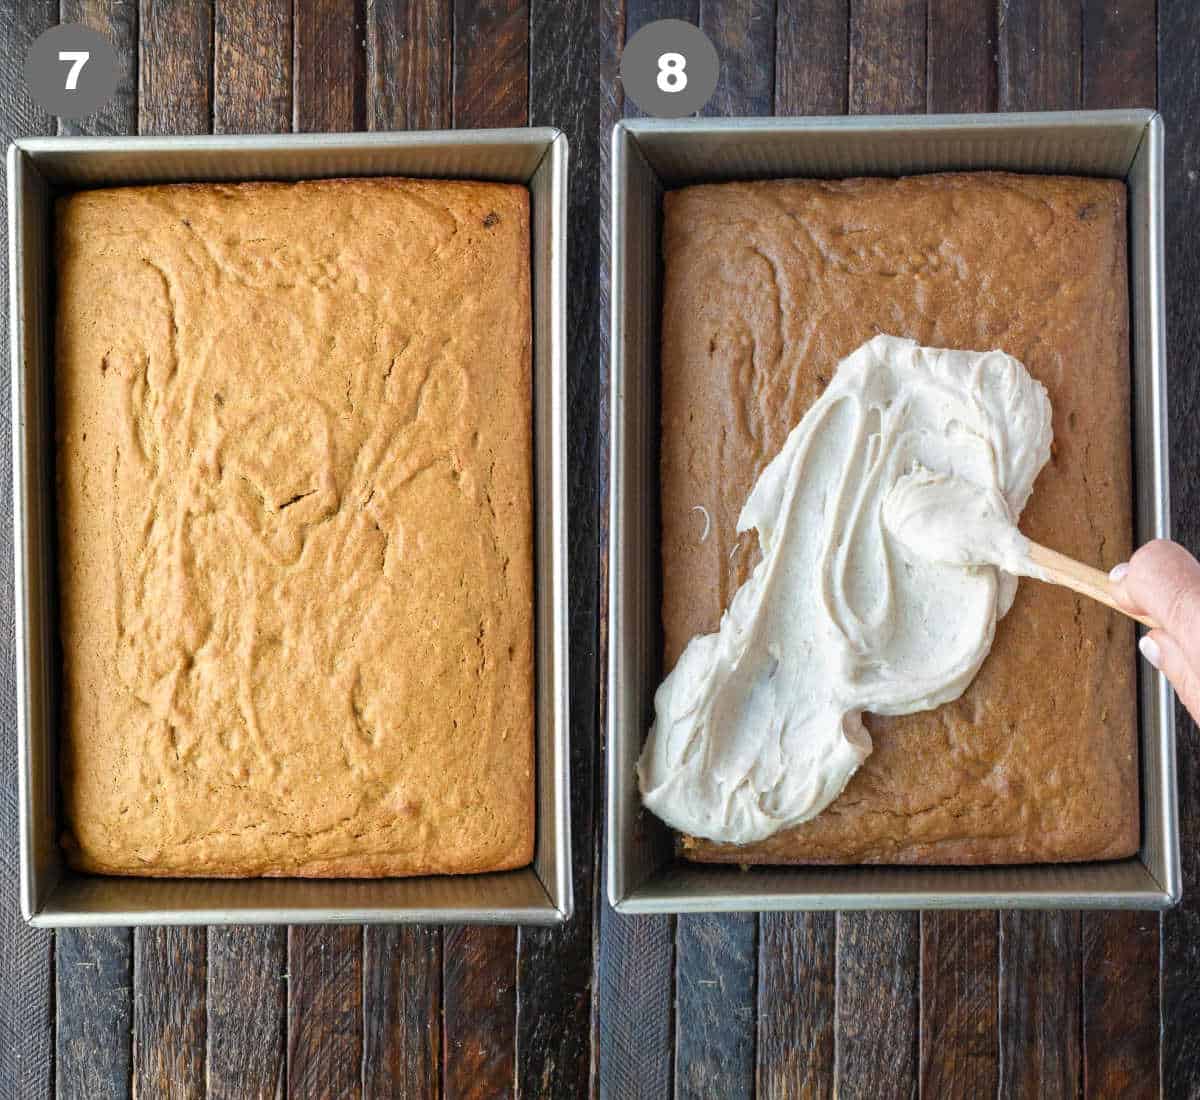 Sweet potato cake is baked and cooled then frosting is spread on top.